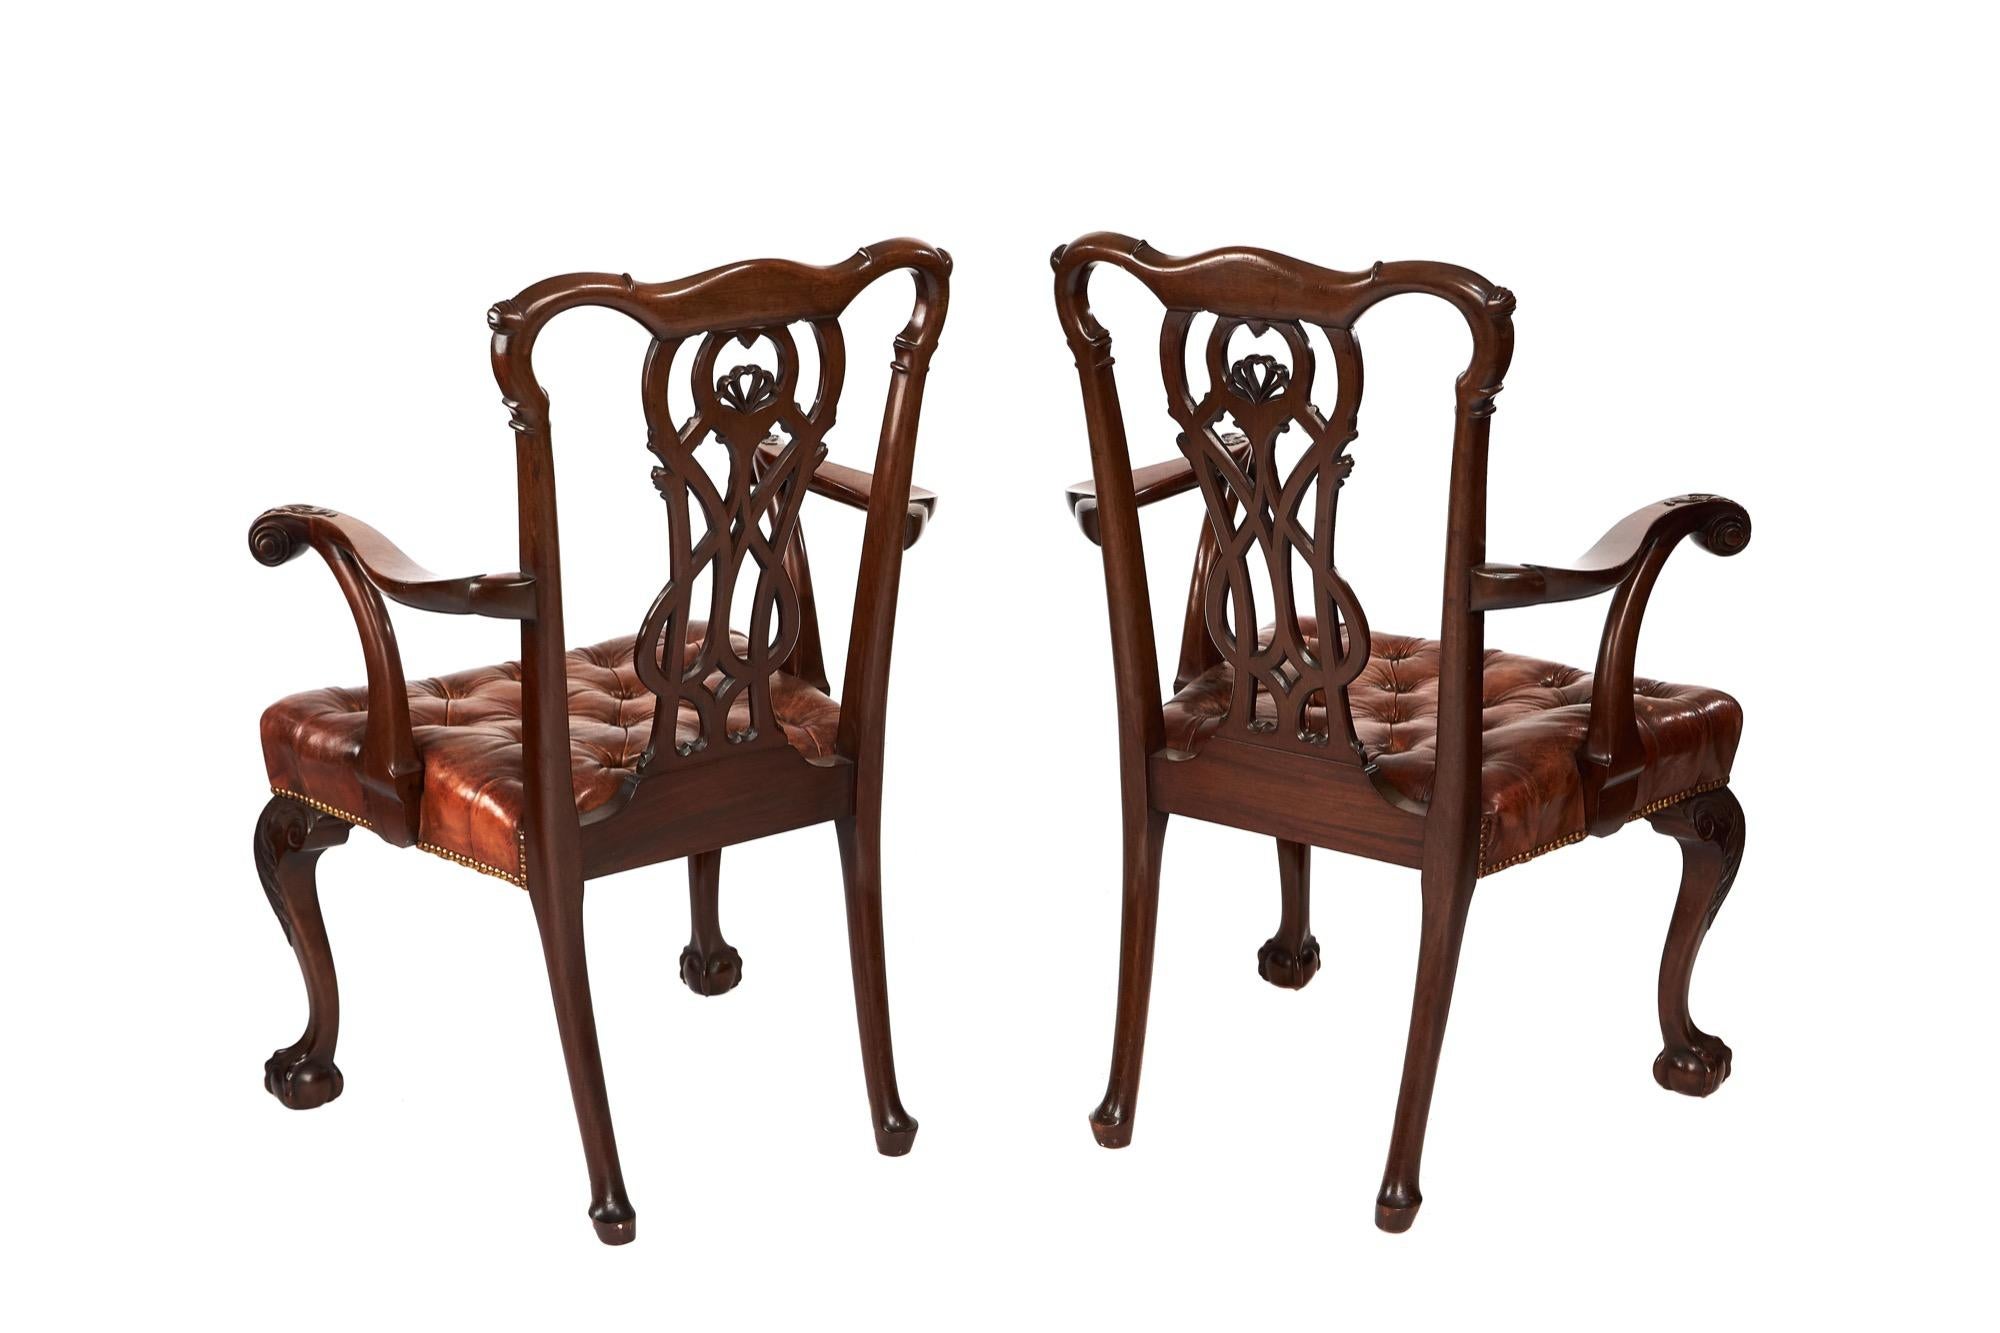 Antique pair of mahogany Chippendale style desk/ elbow chairs having exceptional quality carvings to the backs, spectacular fine scrolled carvings to the front of the open arms, beautiful carvings to the knees and terminating in glorious claw and